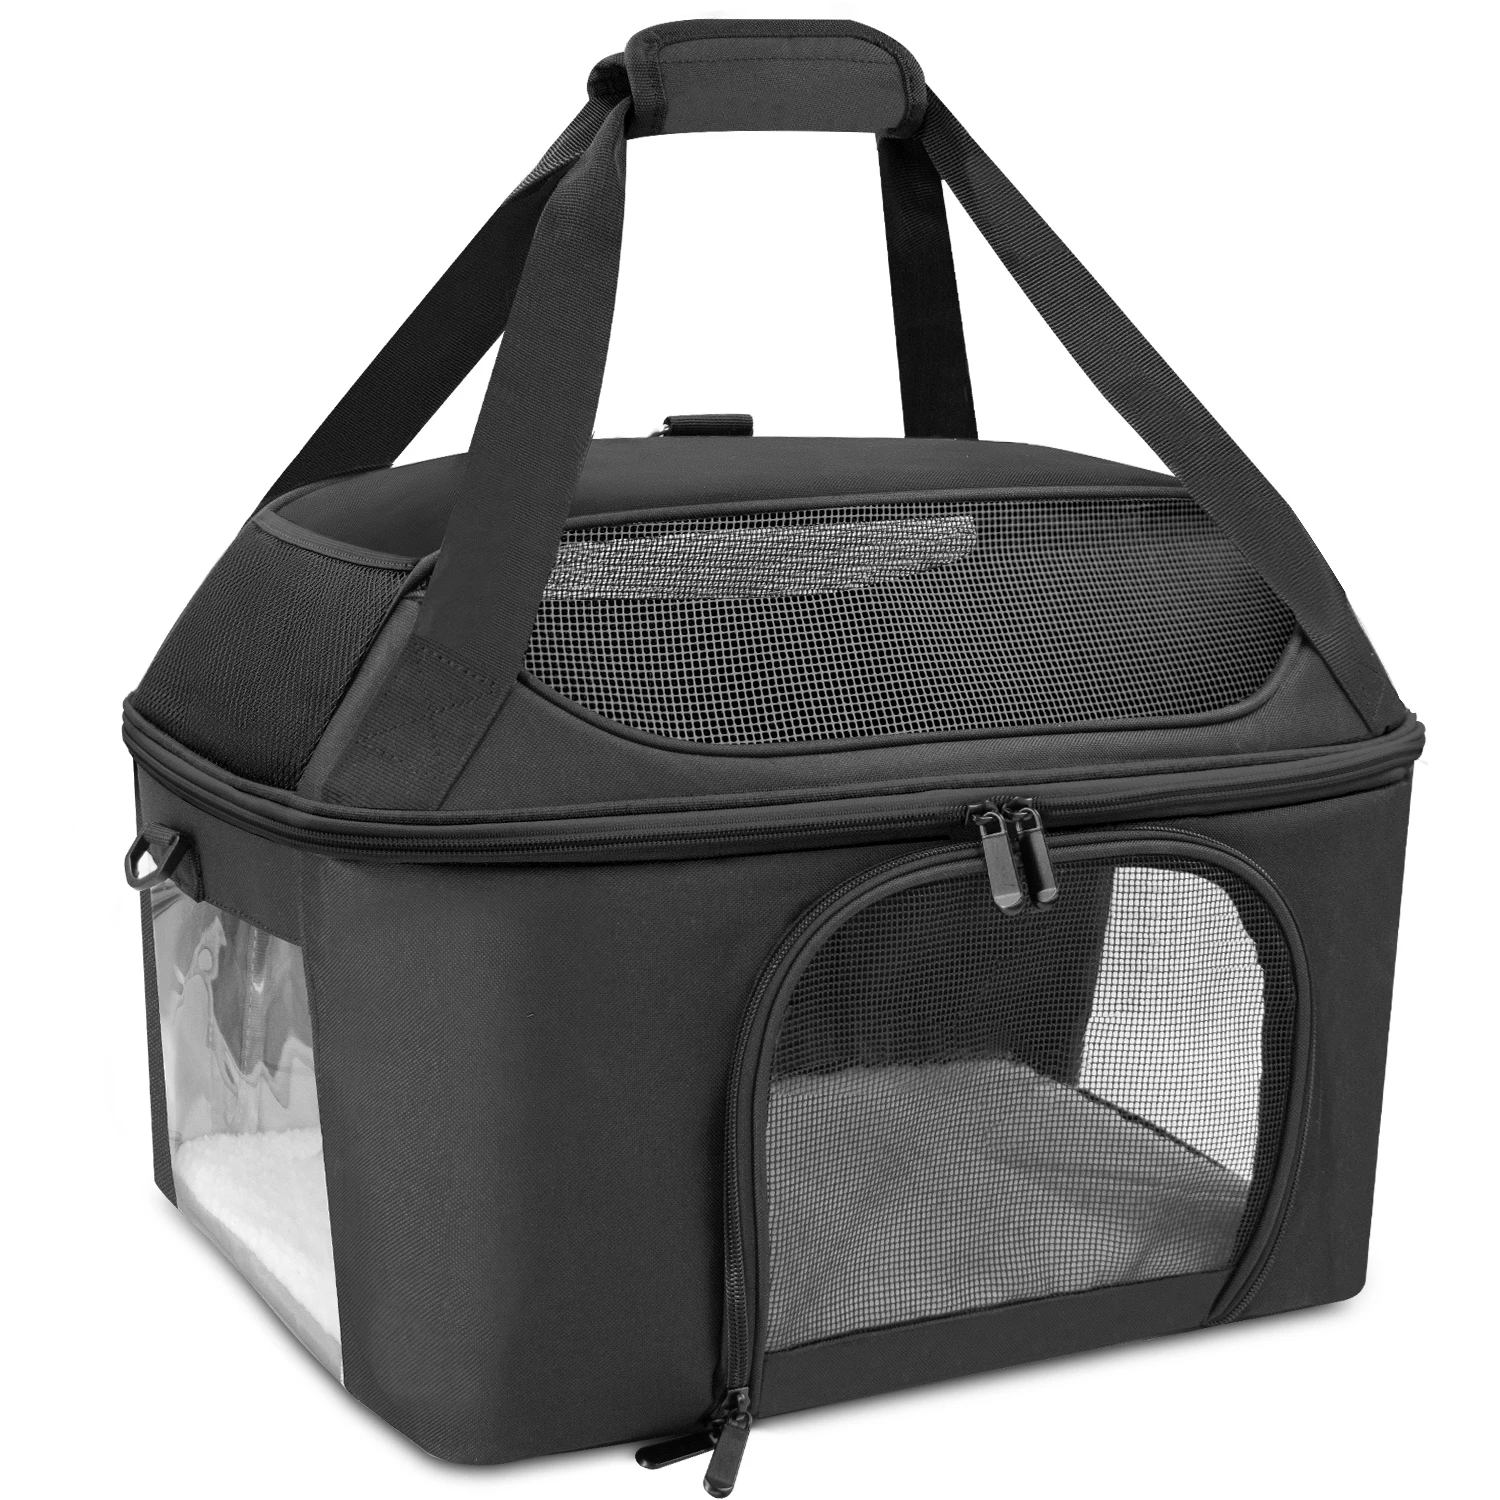 

Travel Portable Dog Carrier Hand Bag Breathable Mesh Pet Puppy Backpack Outdoor Shoulder Bag For Small Dogs Cats Chihuahua